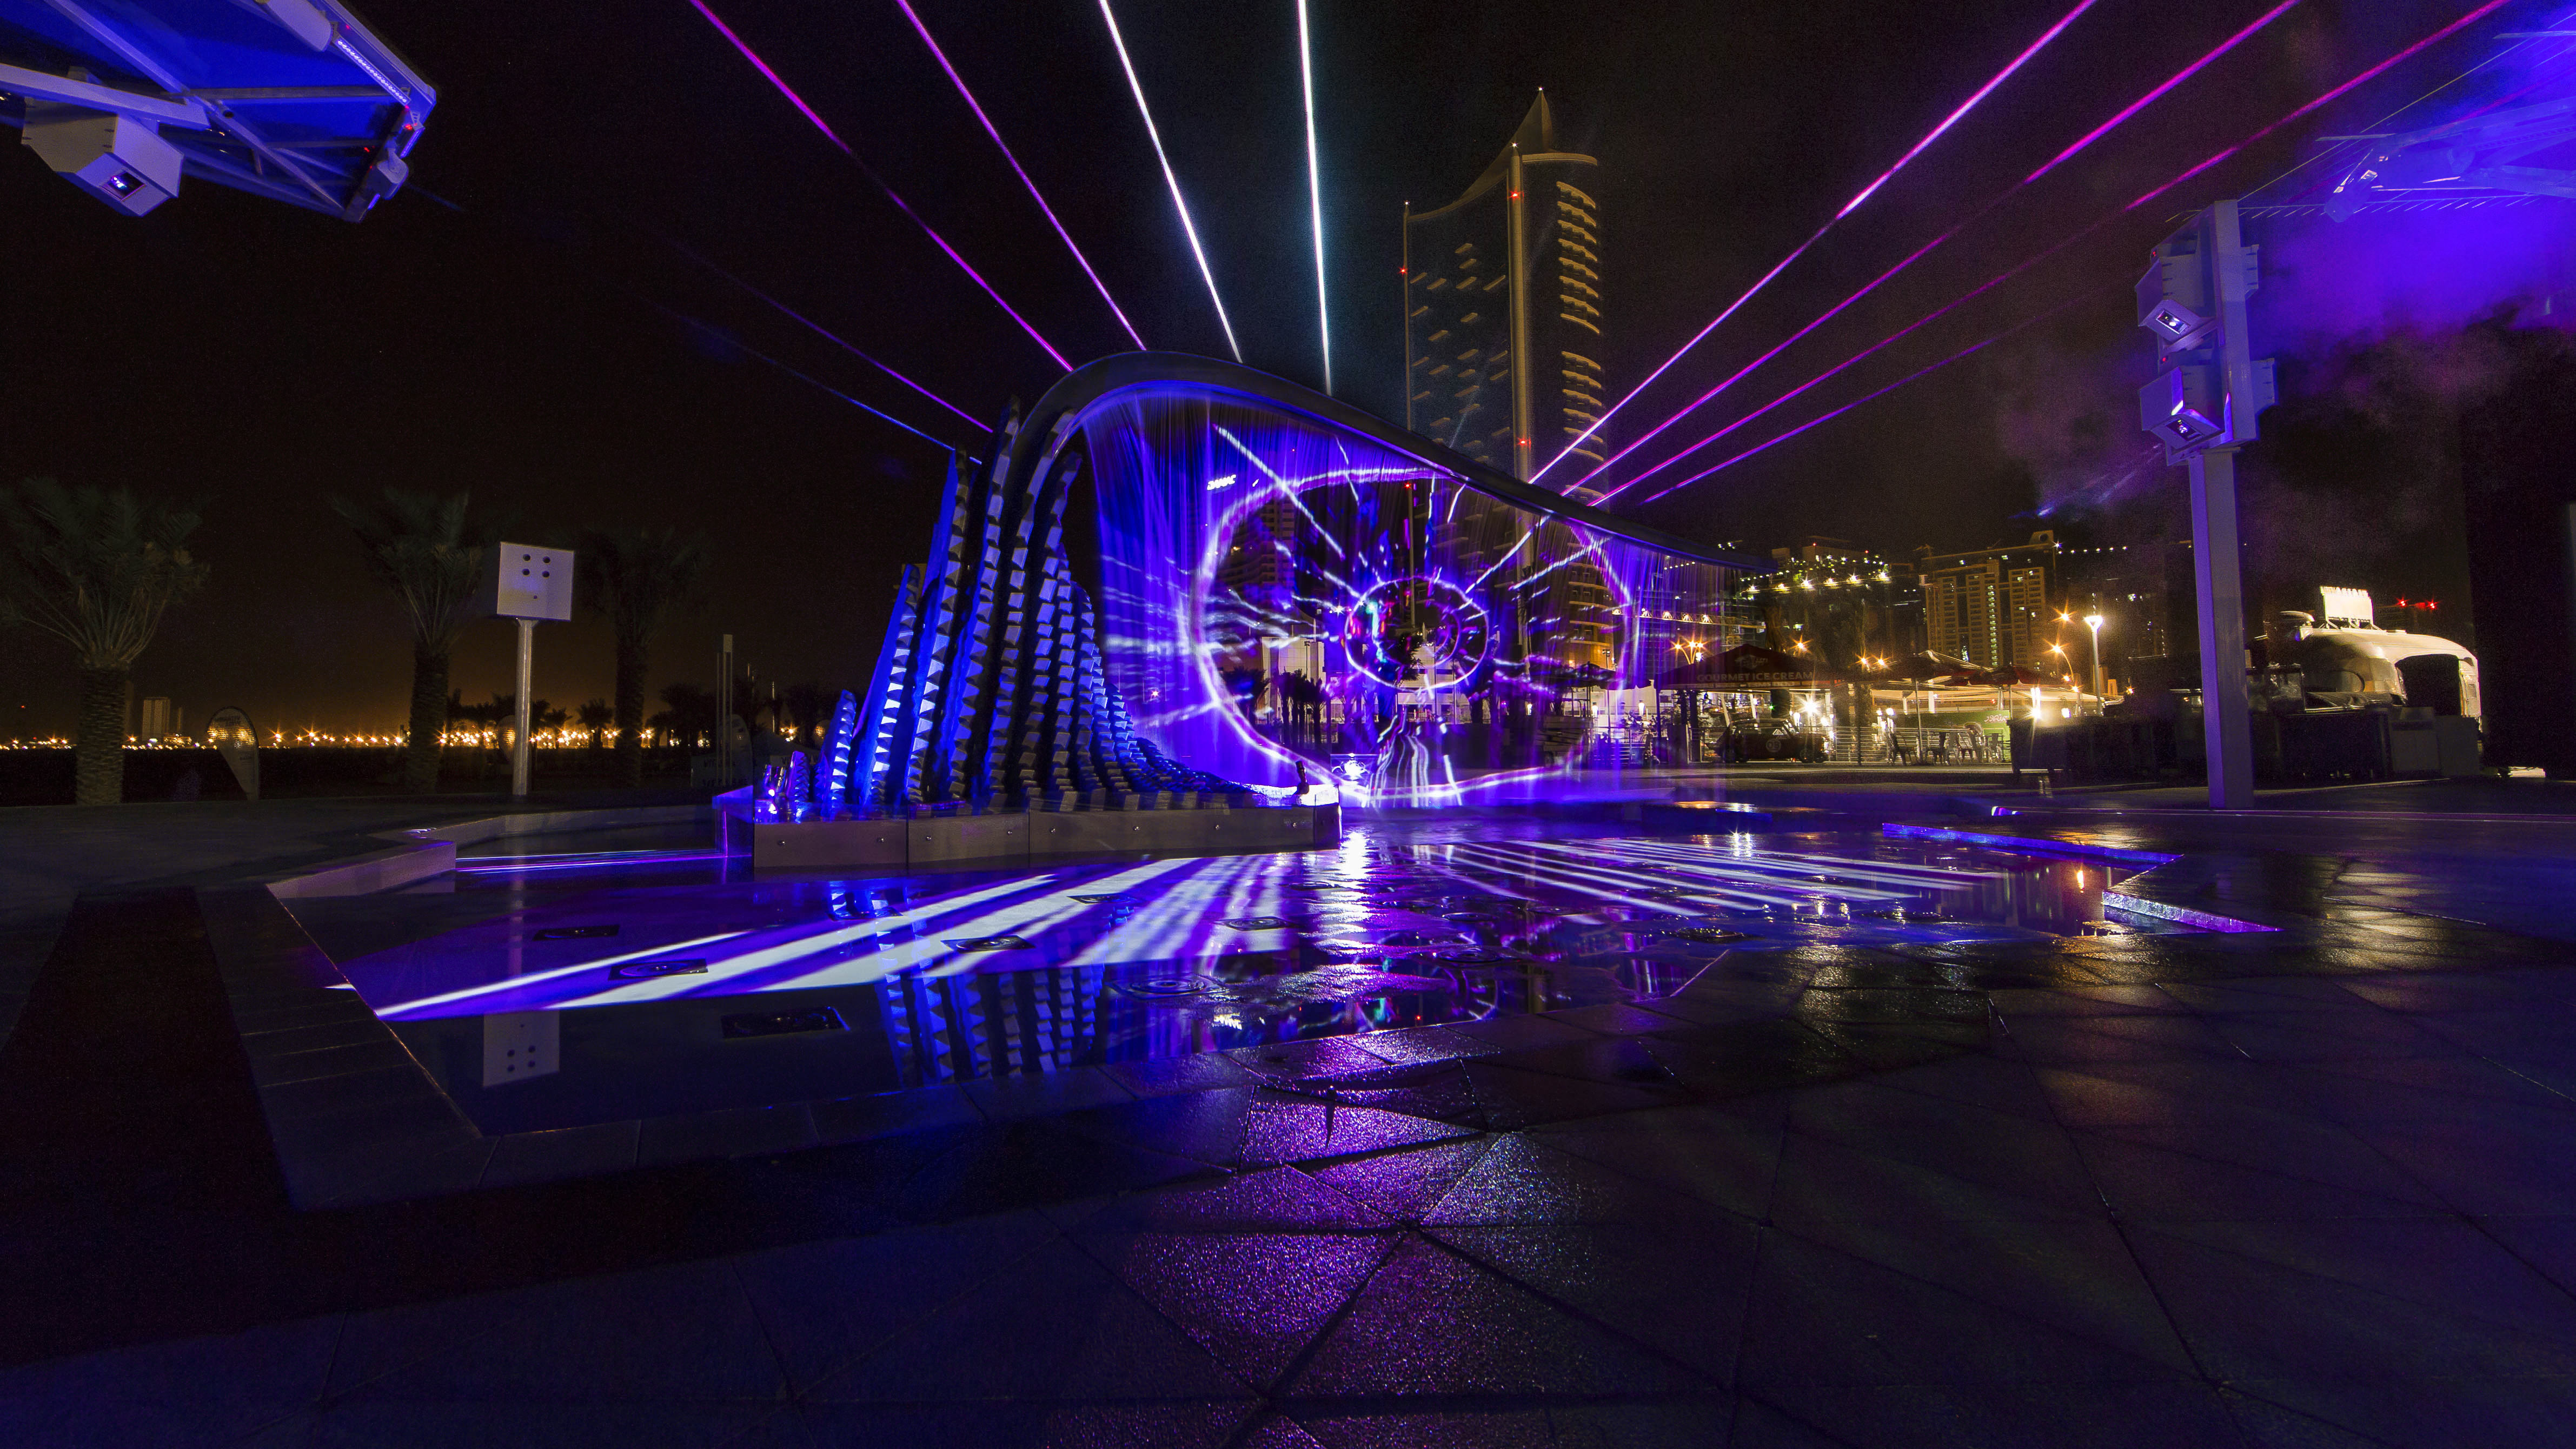 LASERVISION partners ALDAR for Abu Dhabi's First Water & Light Show at Reem Central Park - Laservision